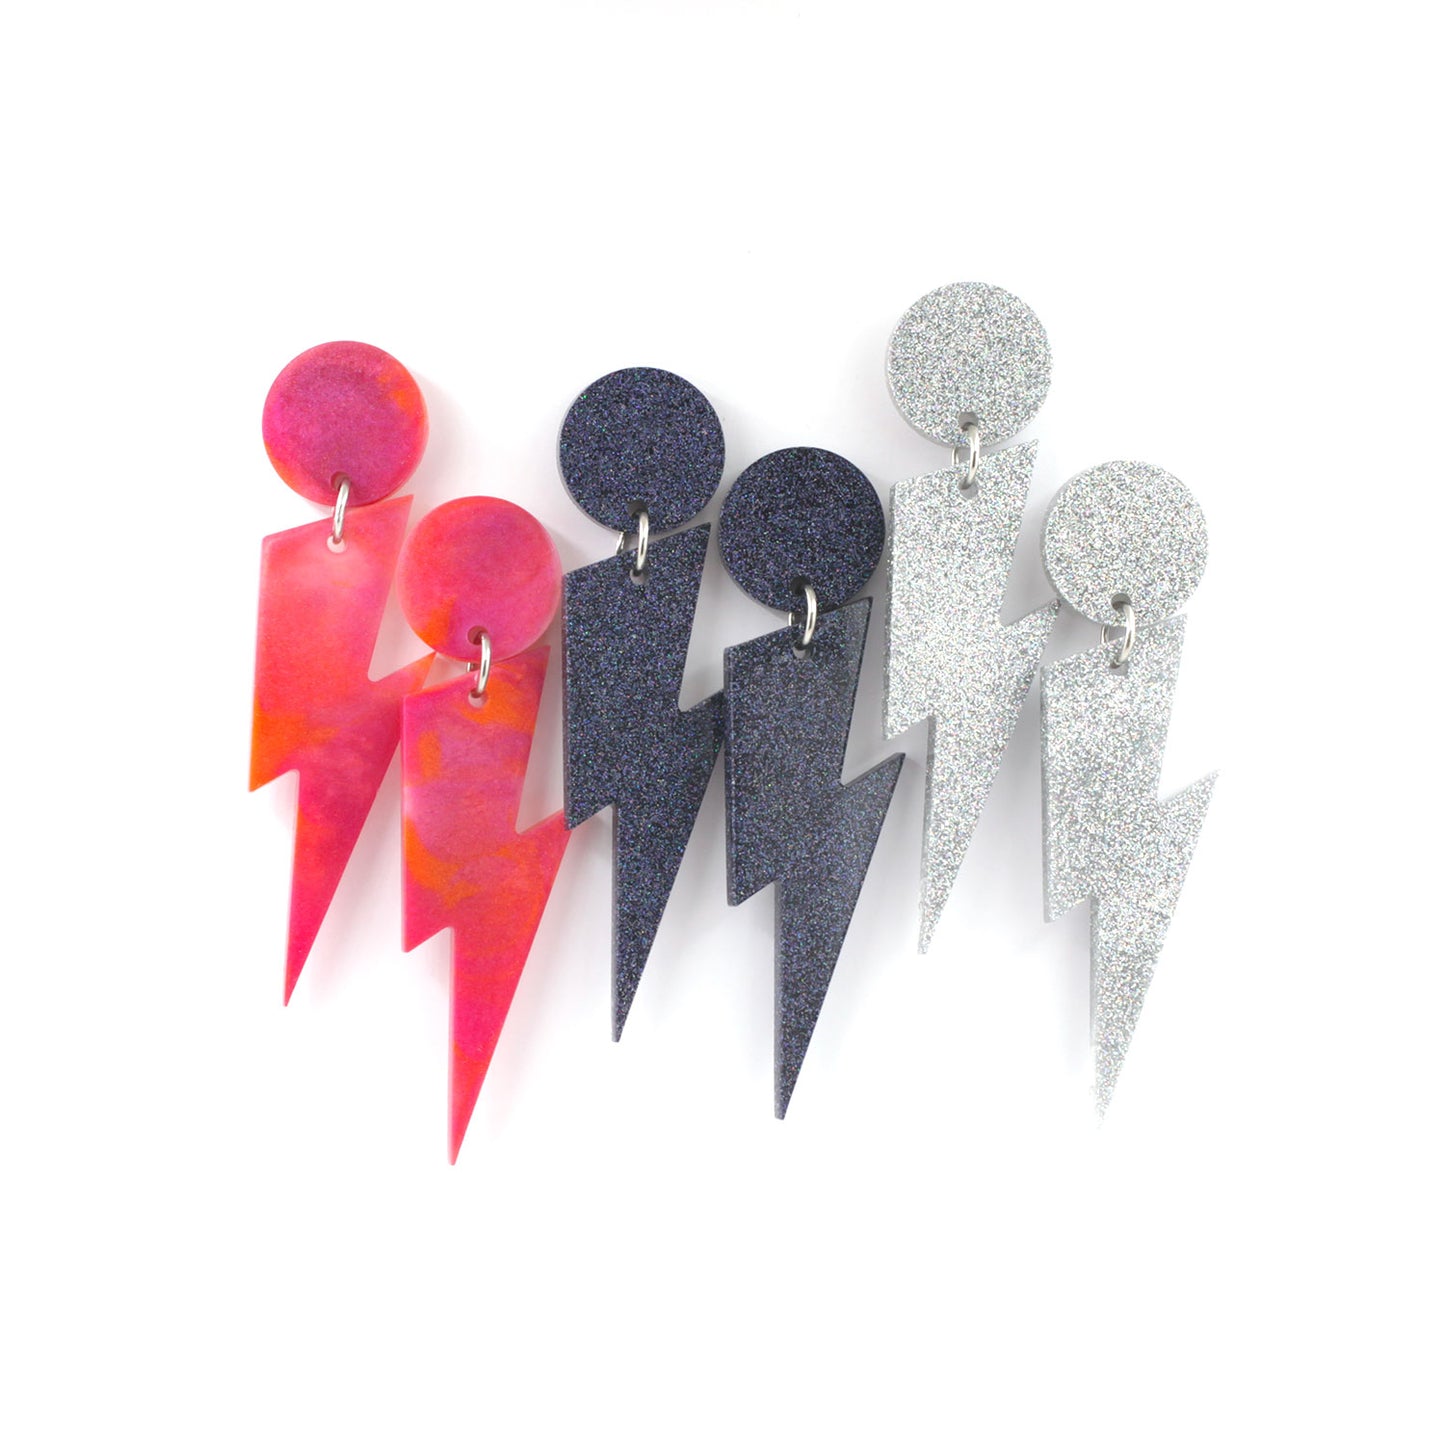 this is a picture of three pairs of bolts dangle earrings on a white background. On the left, the earrings are pink, orange marbled, at the center, the earrings are black holographic glitter and at the right side, silver holographic glitter.